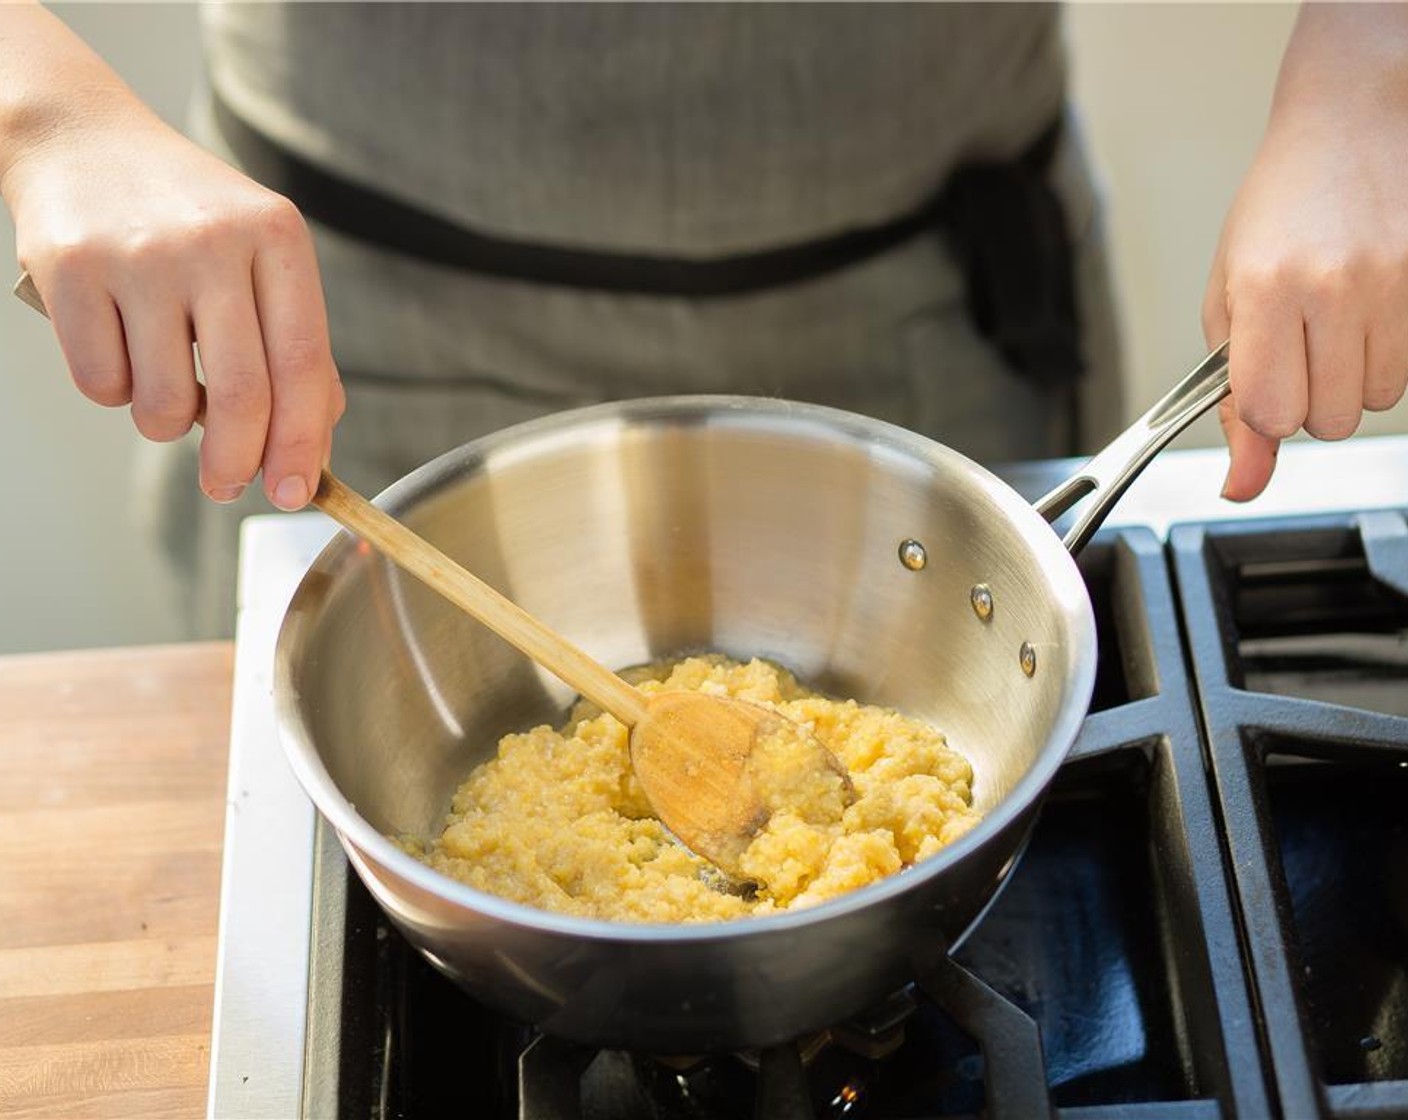 step 3 Add two cups of water and bring to a boil. Add Polenta (1/3 cup), Salt (1/2 tsp) and reduce heat to low and cover. Stir occasionally. Cook for 20 minutes. Add the Parmesan Cheese (1/4 cup) and stir to combine. Keep warm.